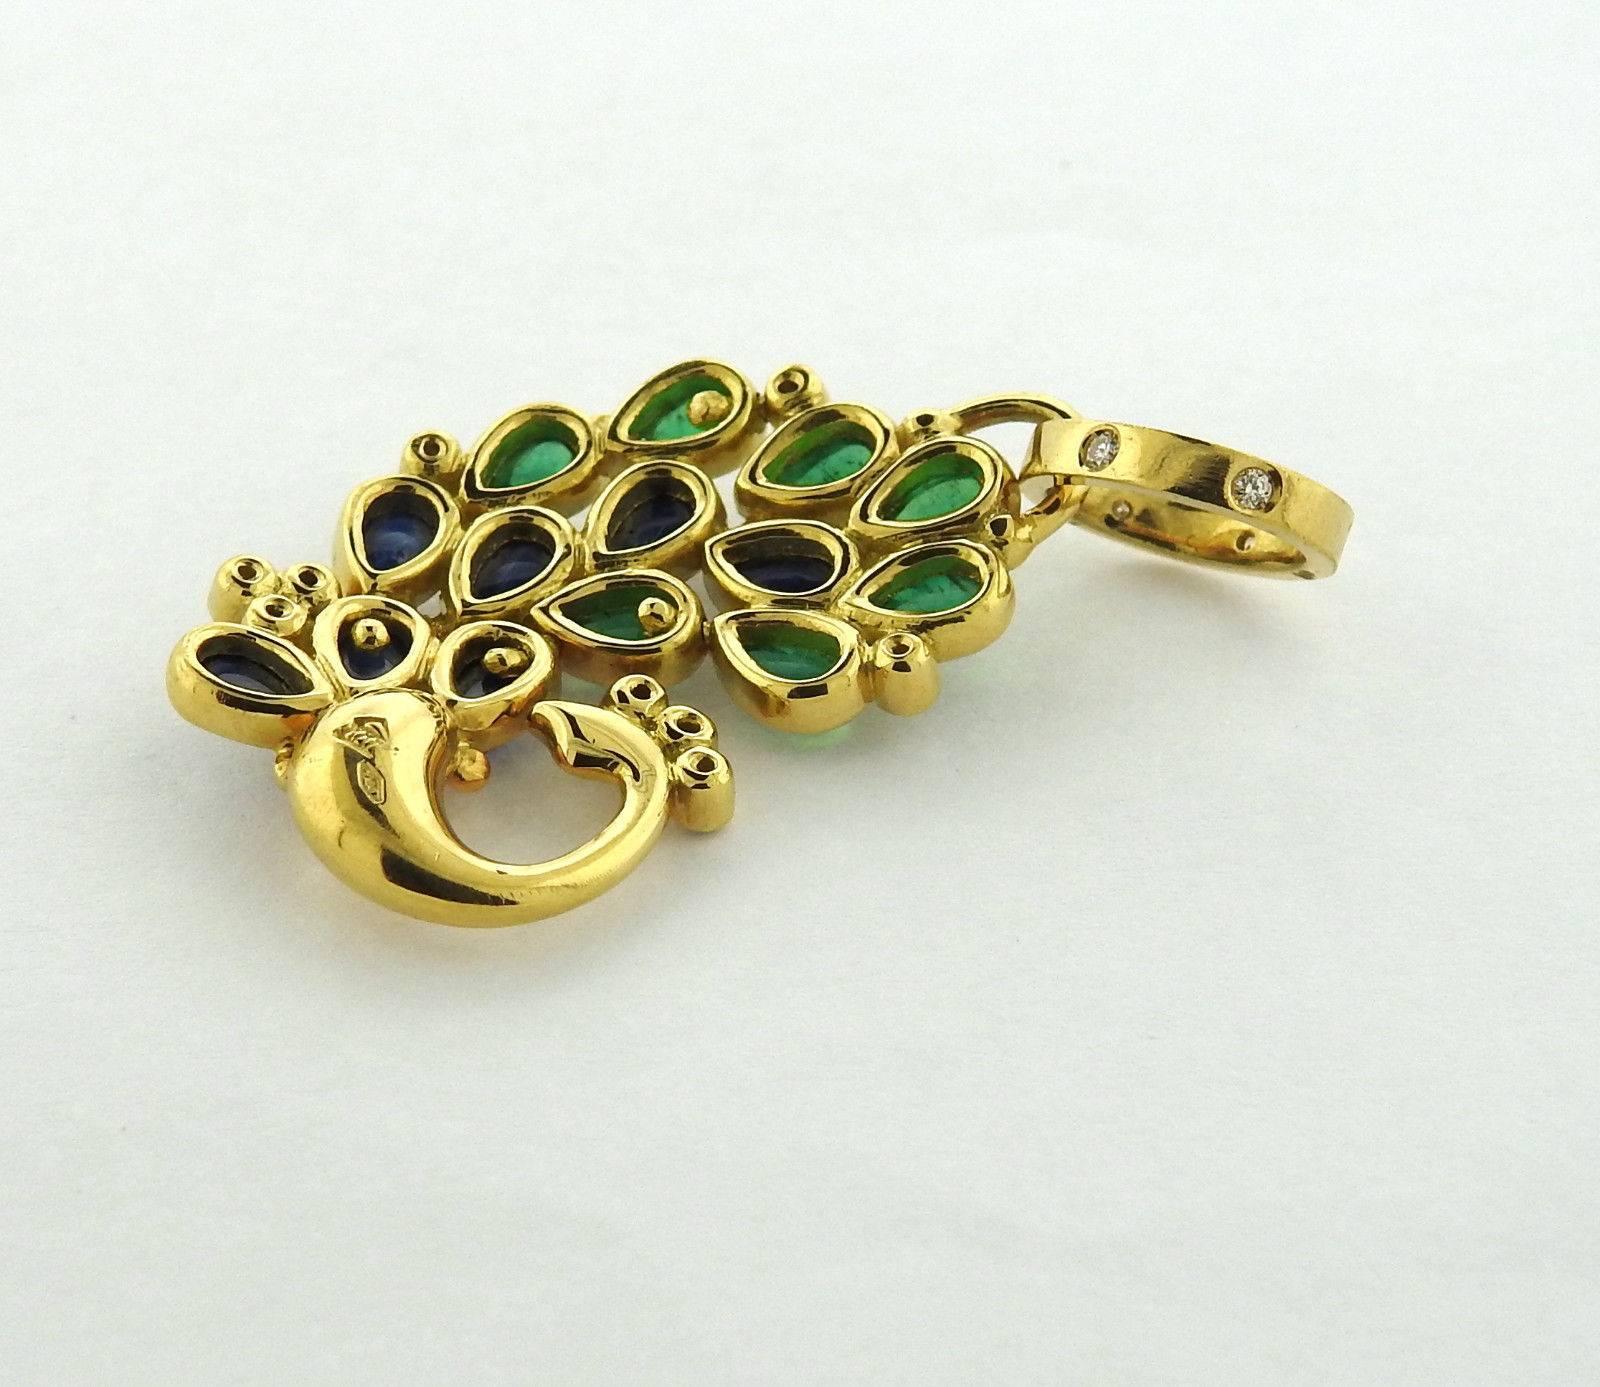 An 18k yellow gold peacock pendant set with sapphires, emeralds, and approximately 0.13ctw of G/VS diamonds. The pendant is 35mm long without bale x 26mm wide, bale - 10mm x 13mm.  The weight of the piece is 11.4 grams.  Marked: Temple mark, 750. 